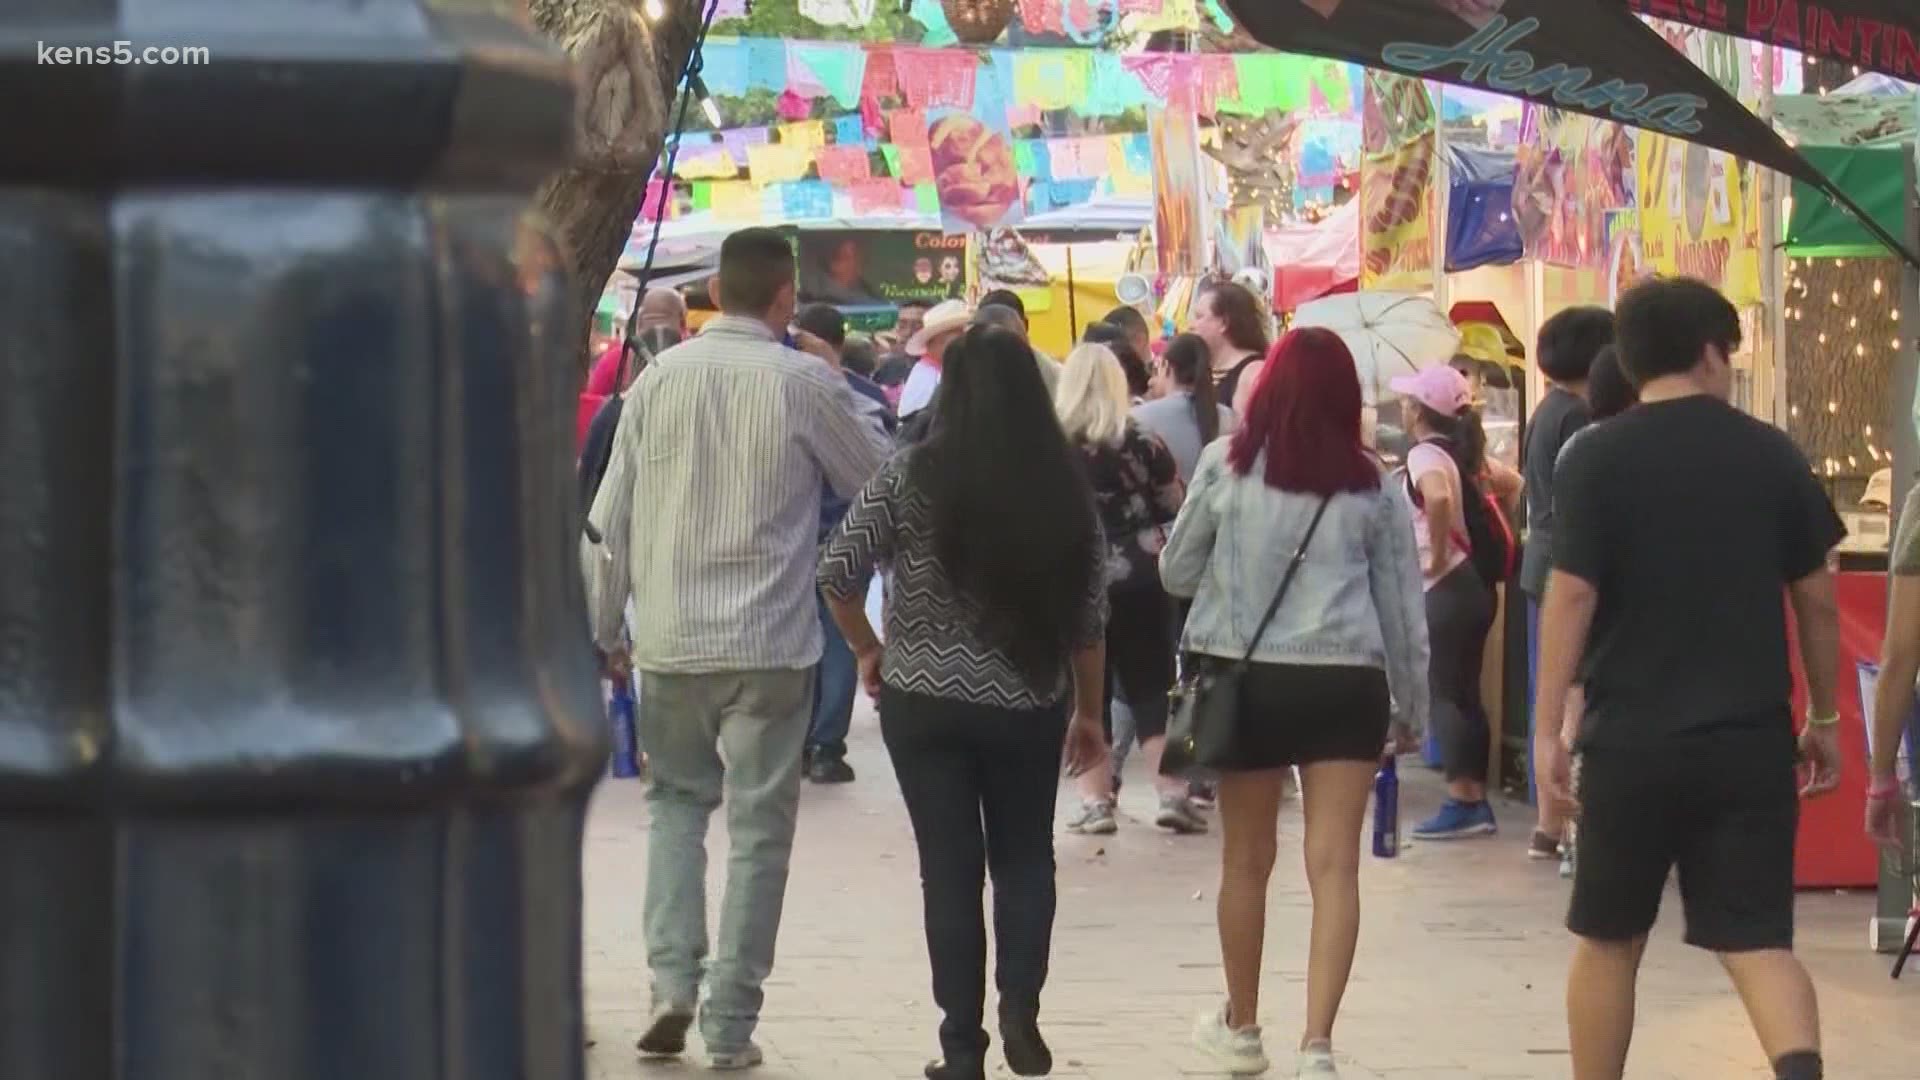 San Antonio's Fiesta is now slated for June, although two of the parades are canceled. Why the is Fiesta Commission is determined to have the party this year?